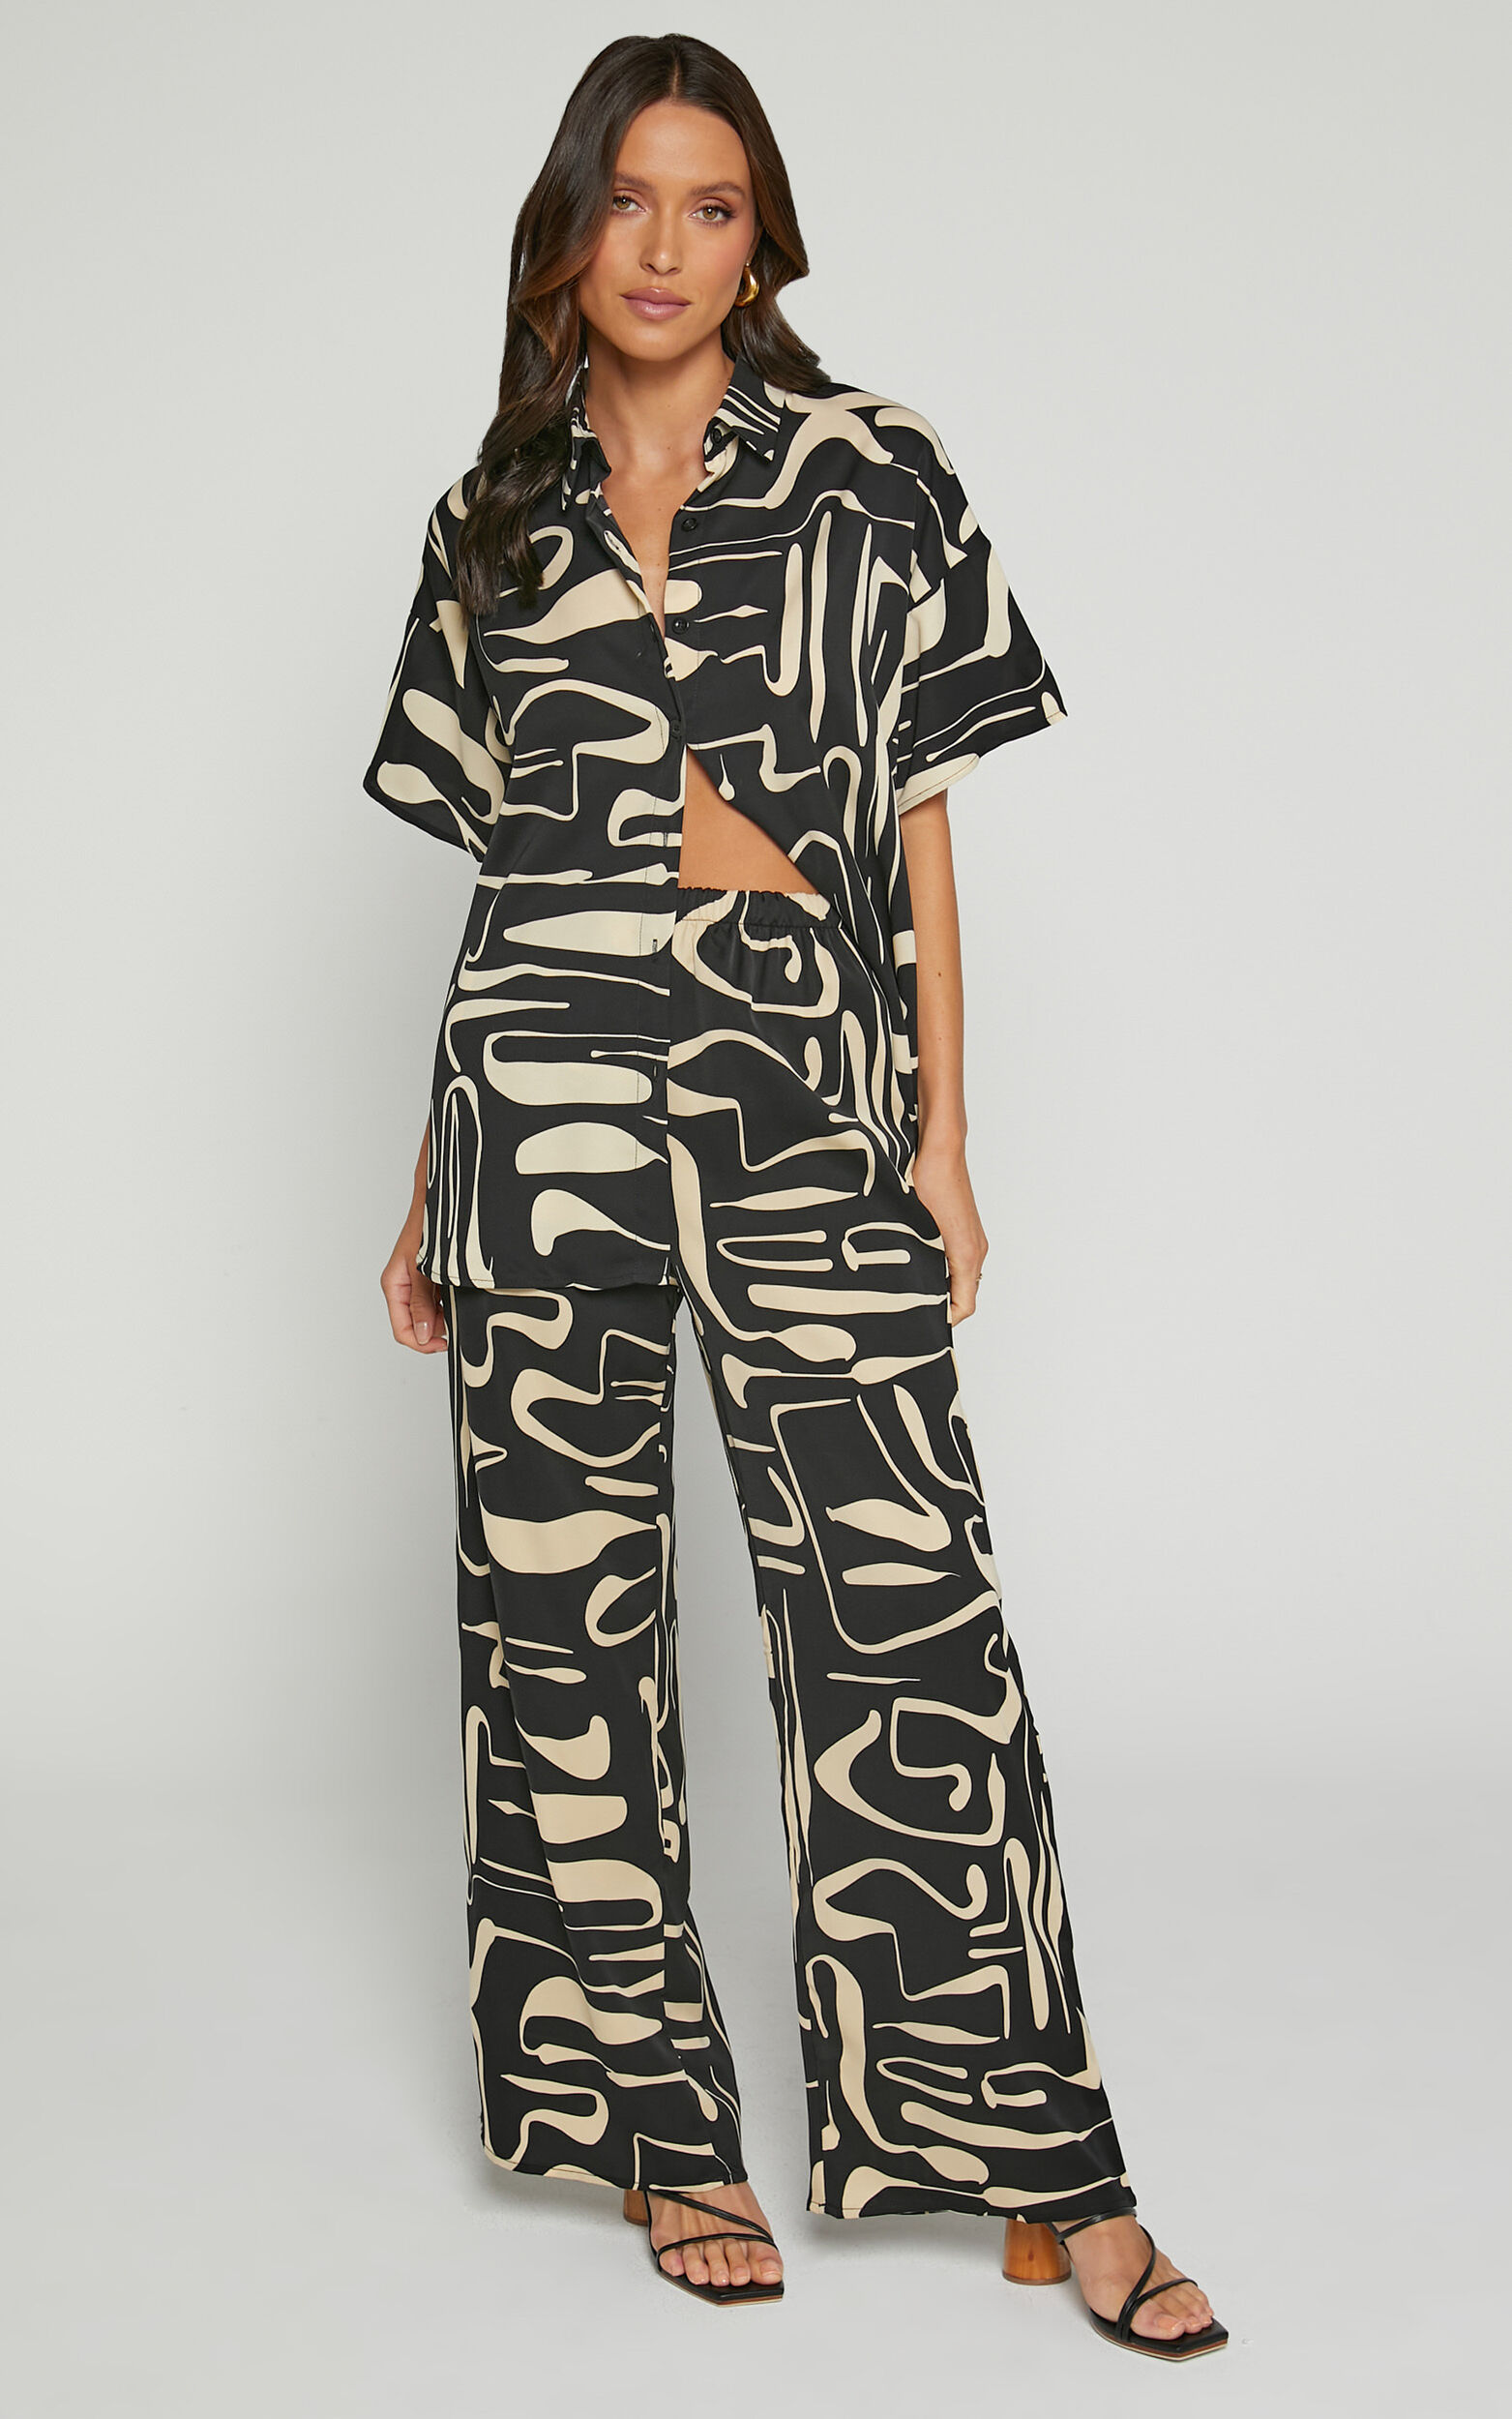 Karla Two Piece Set - Button Up Shirt and Wide Leg Pants Set in Black & Sand Print - XS, BLK1